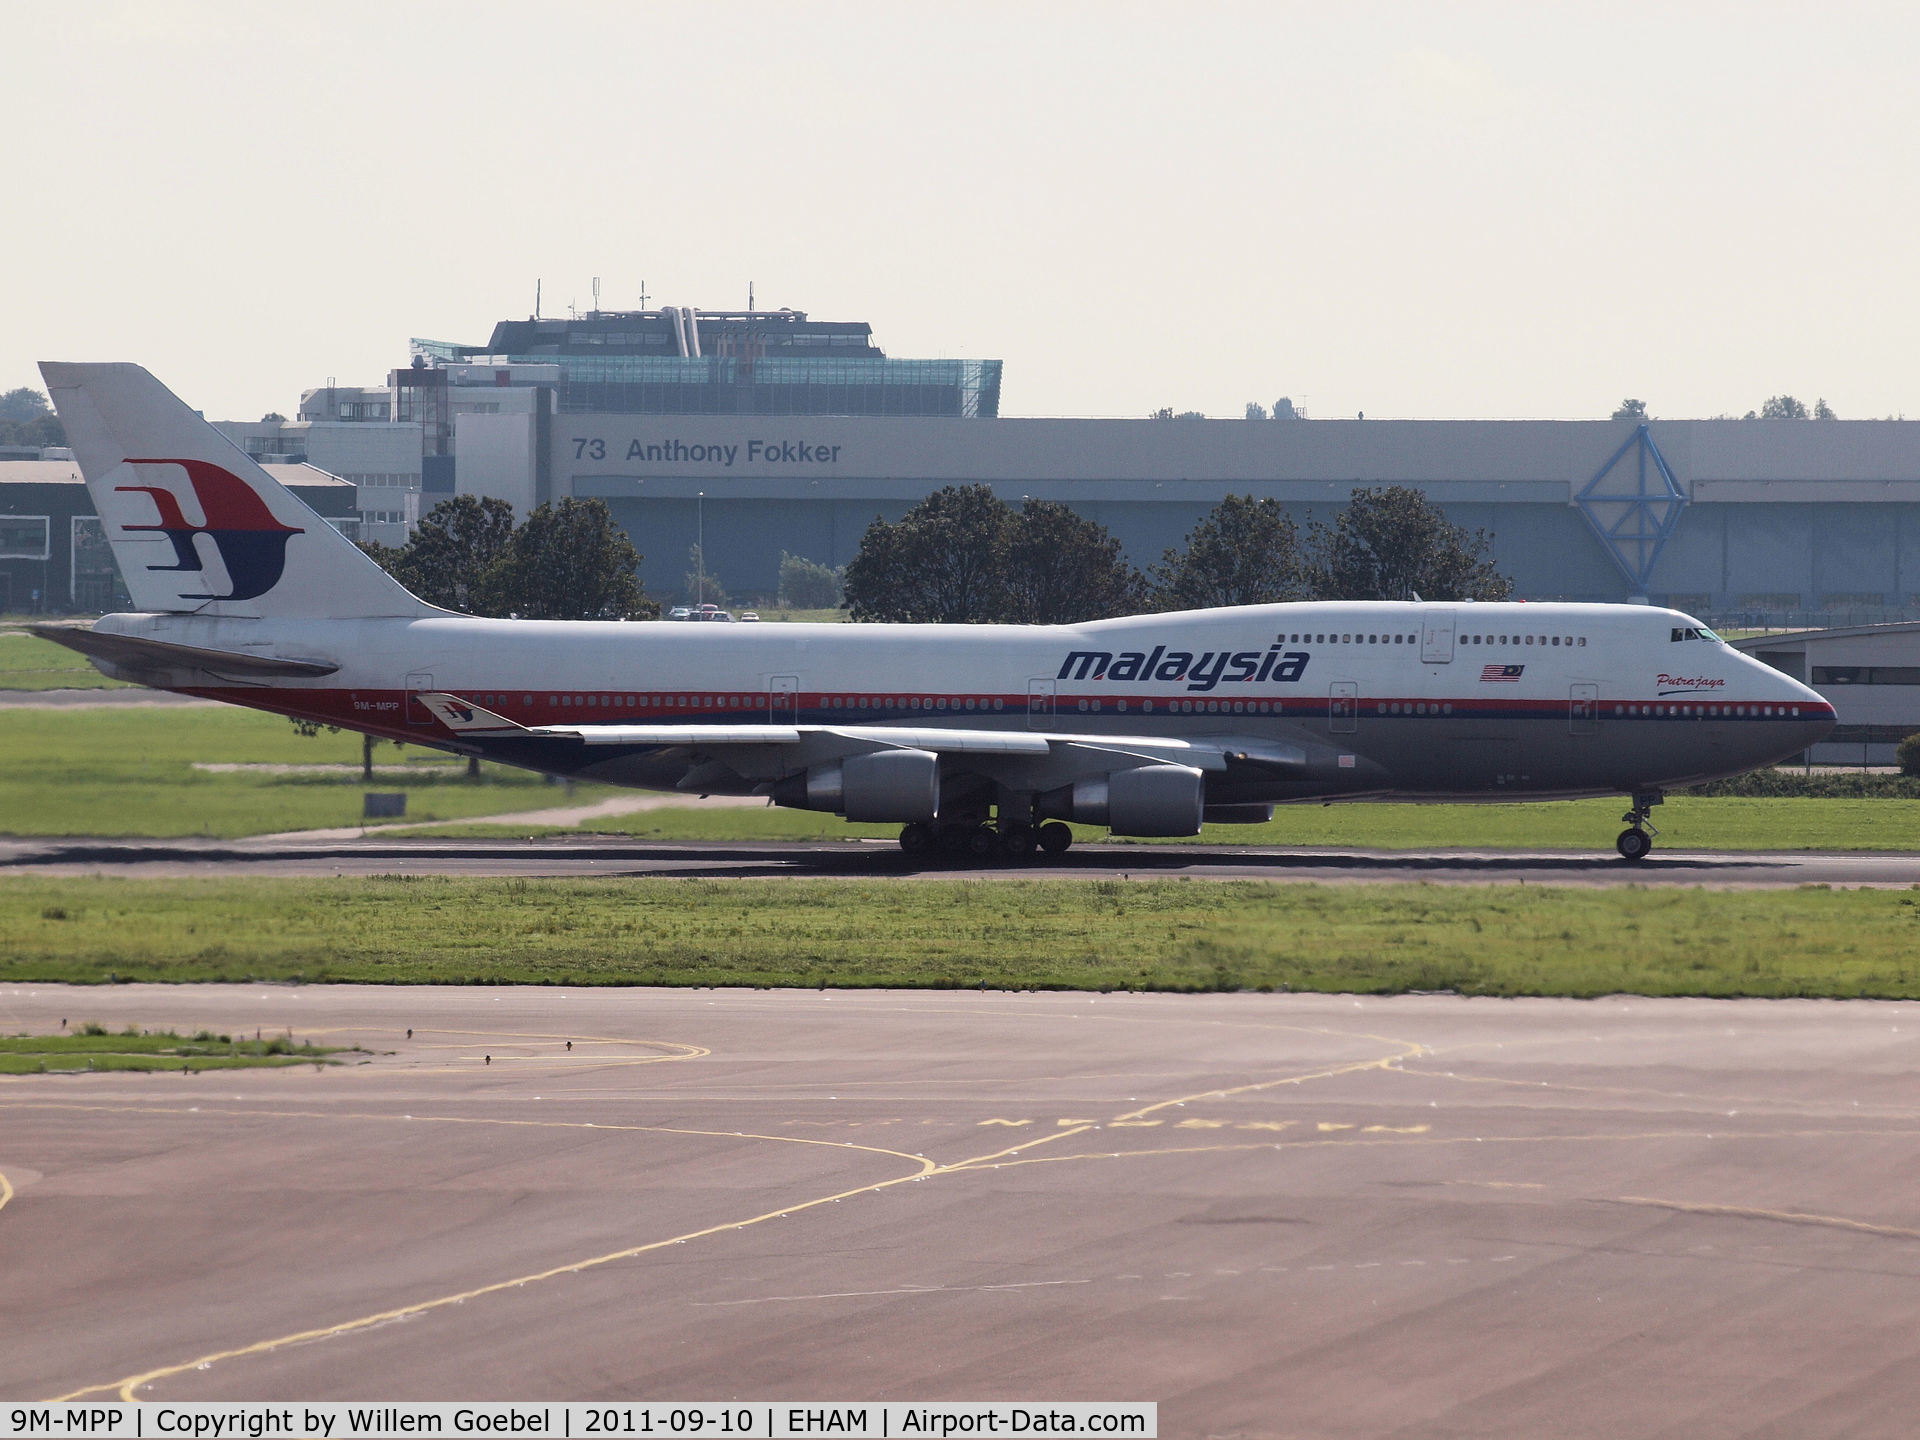 9M-MPP, 2002 Boeing 747-4H6 C/N 29900, Taxi to the runway of 